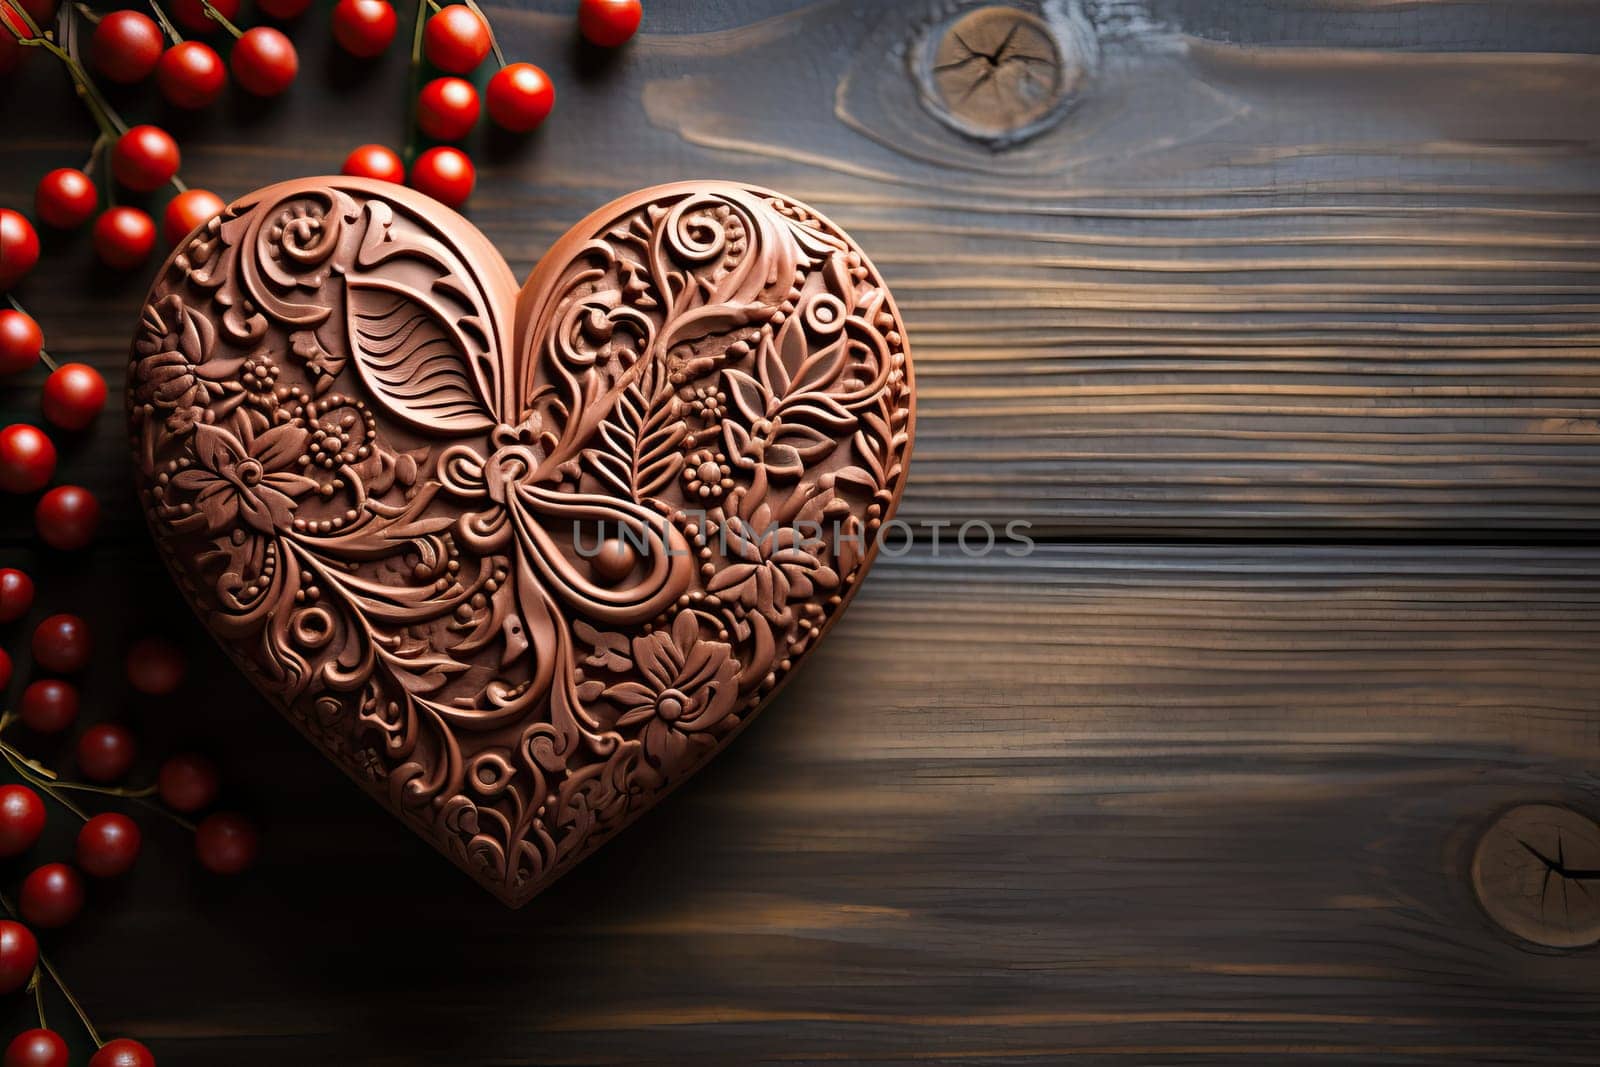 Chocolate heart for a gift, chocolate heart made of chocolate candies on a wooden background. by Niko_Cingaryuk